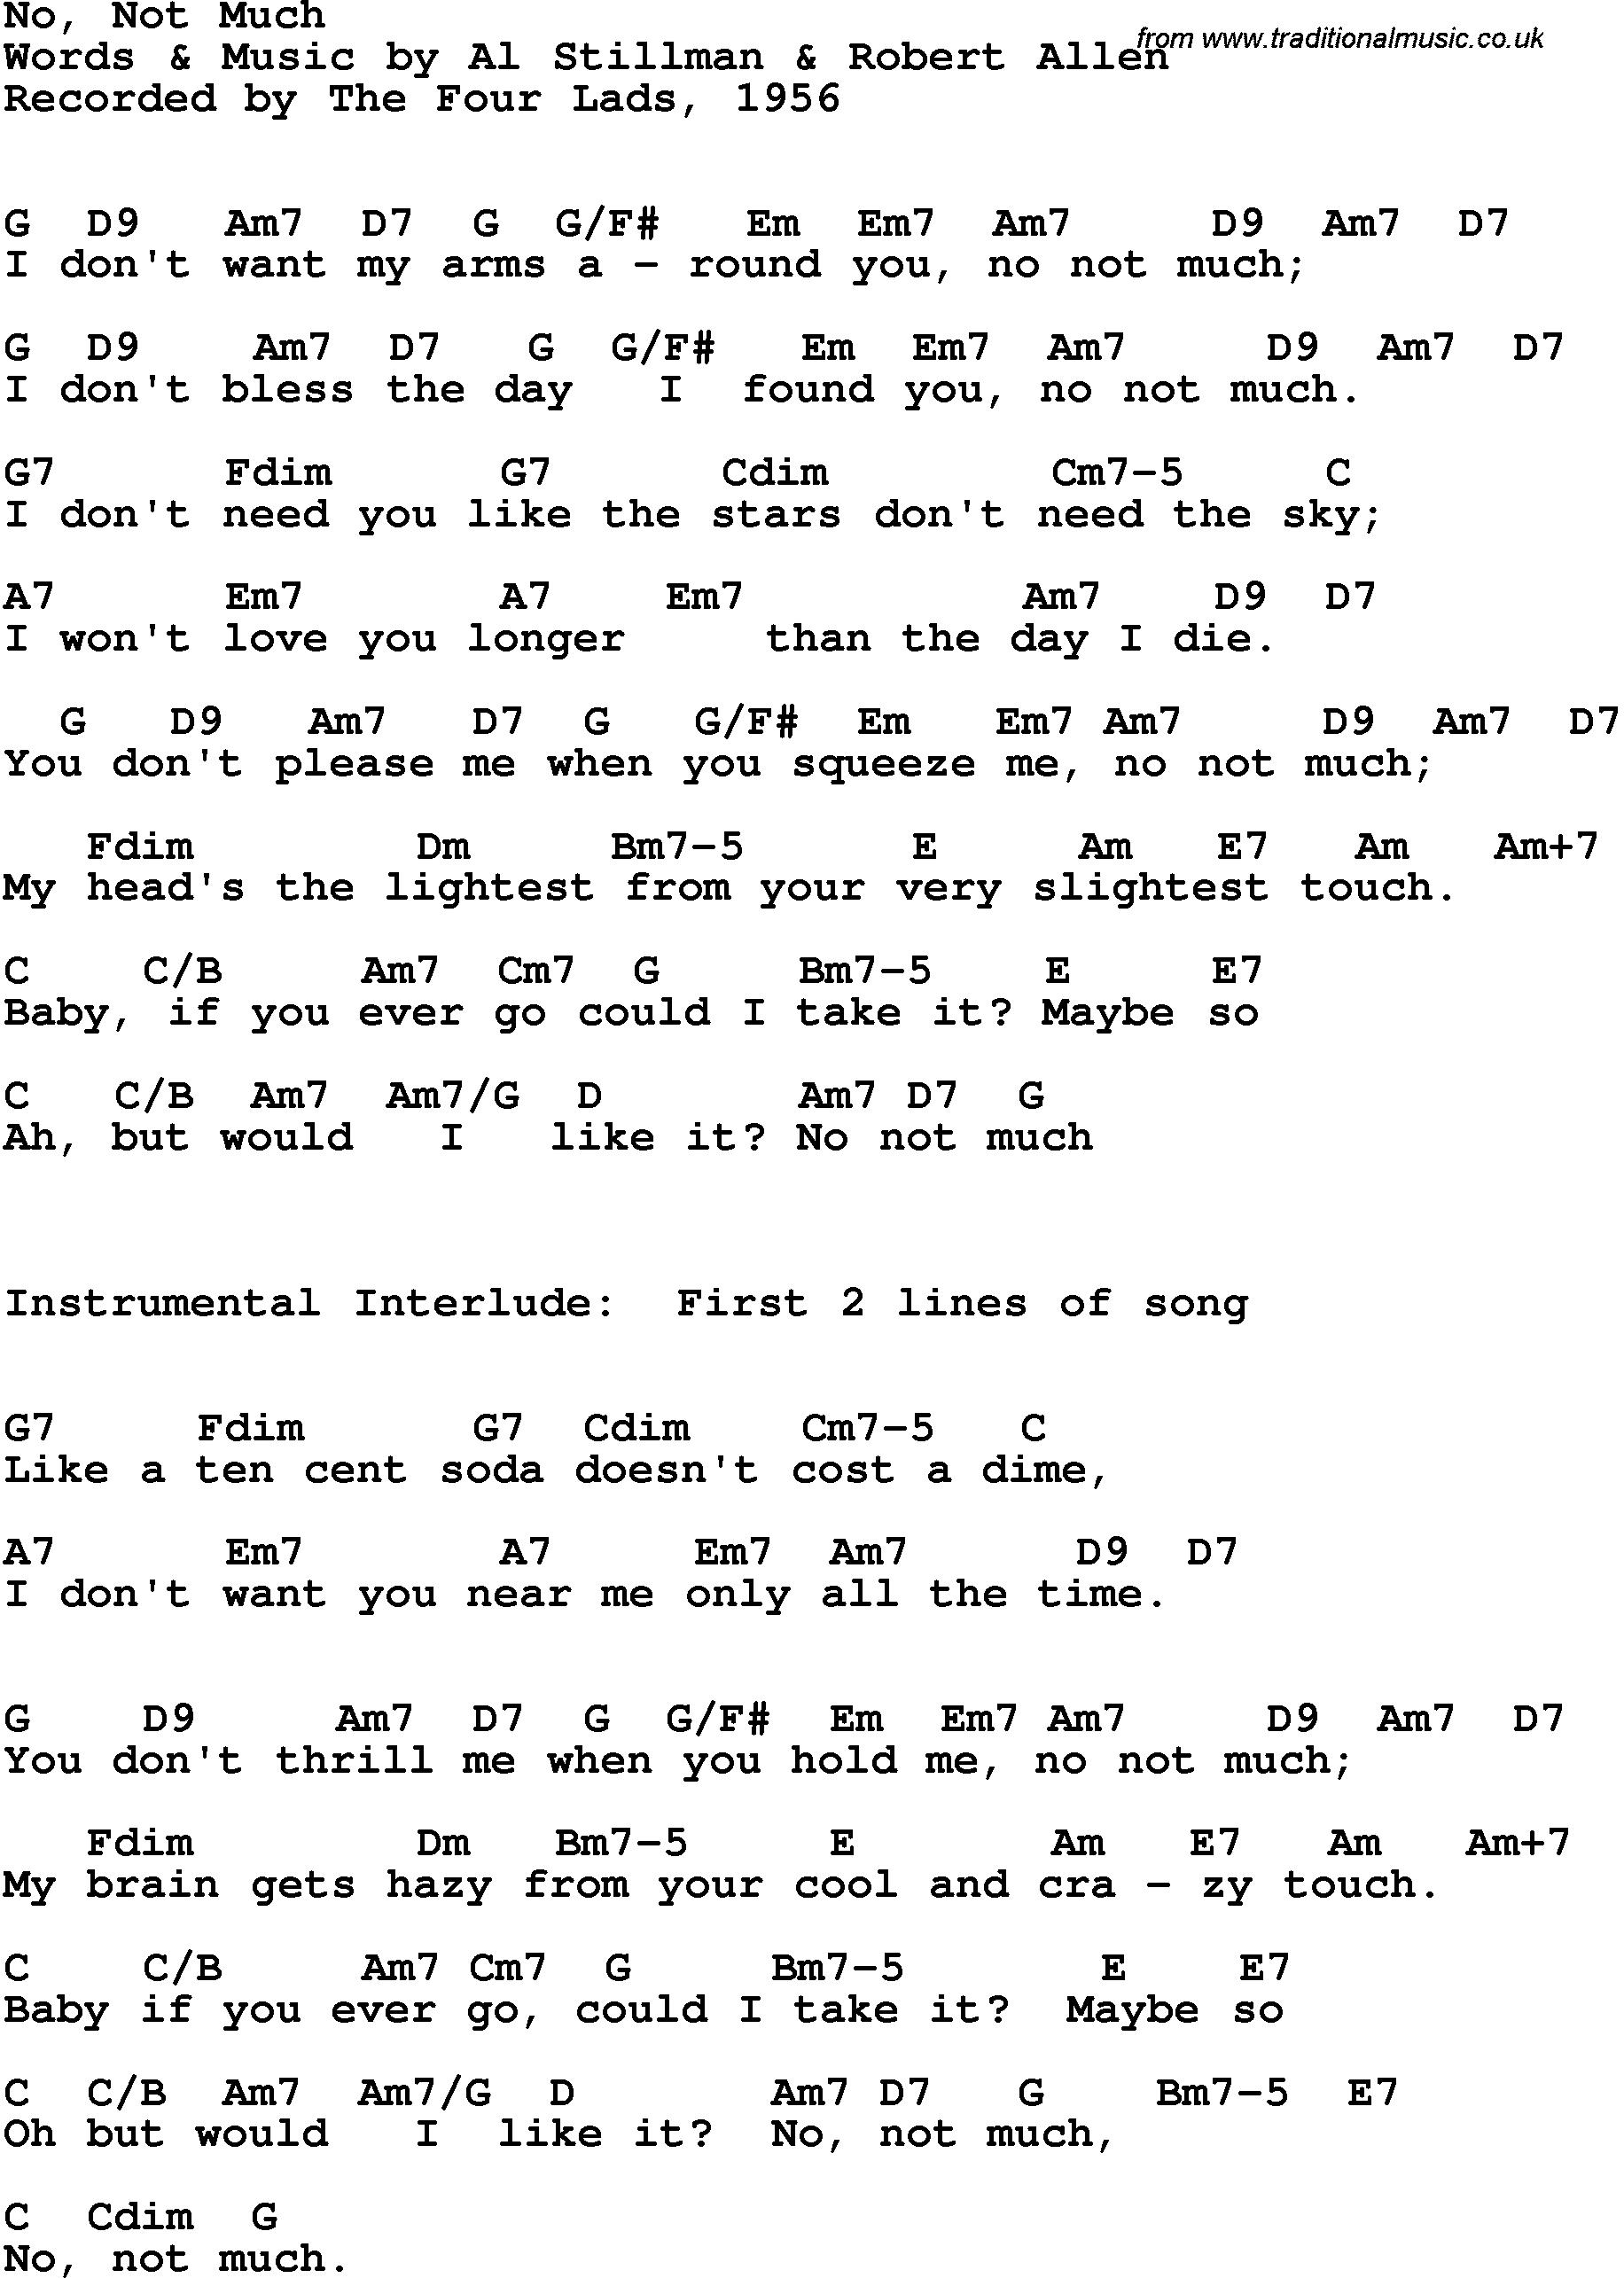 Song Lyrics with guitar chords for No, Not Much - The Four Lads, 1956